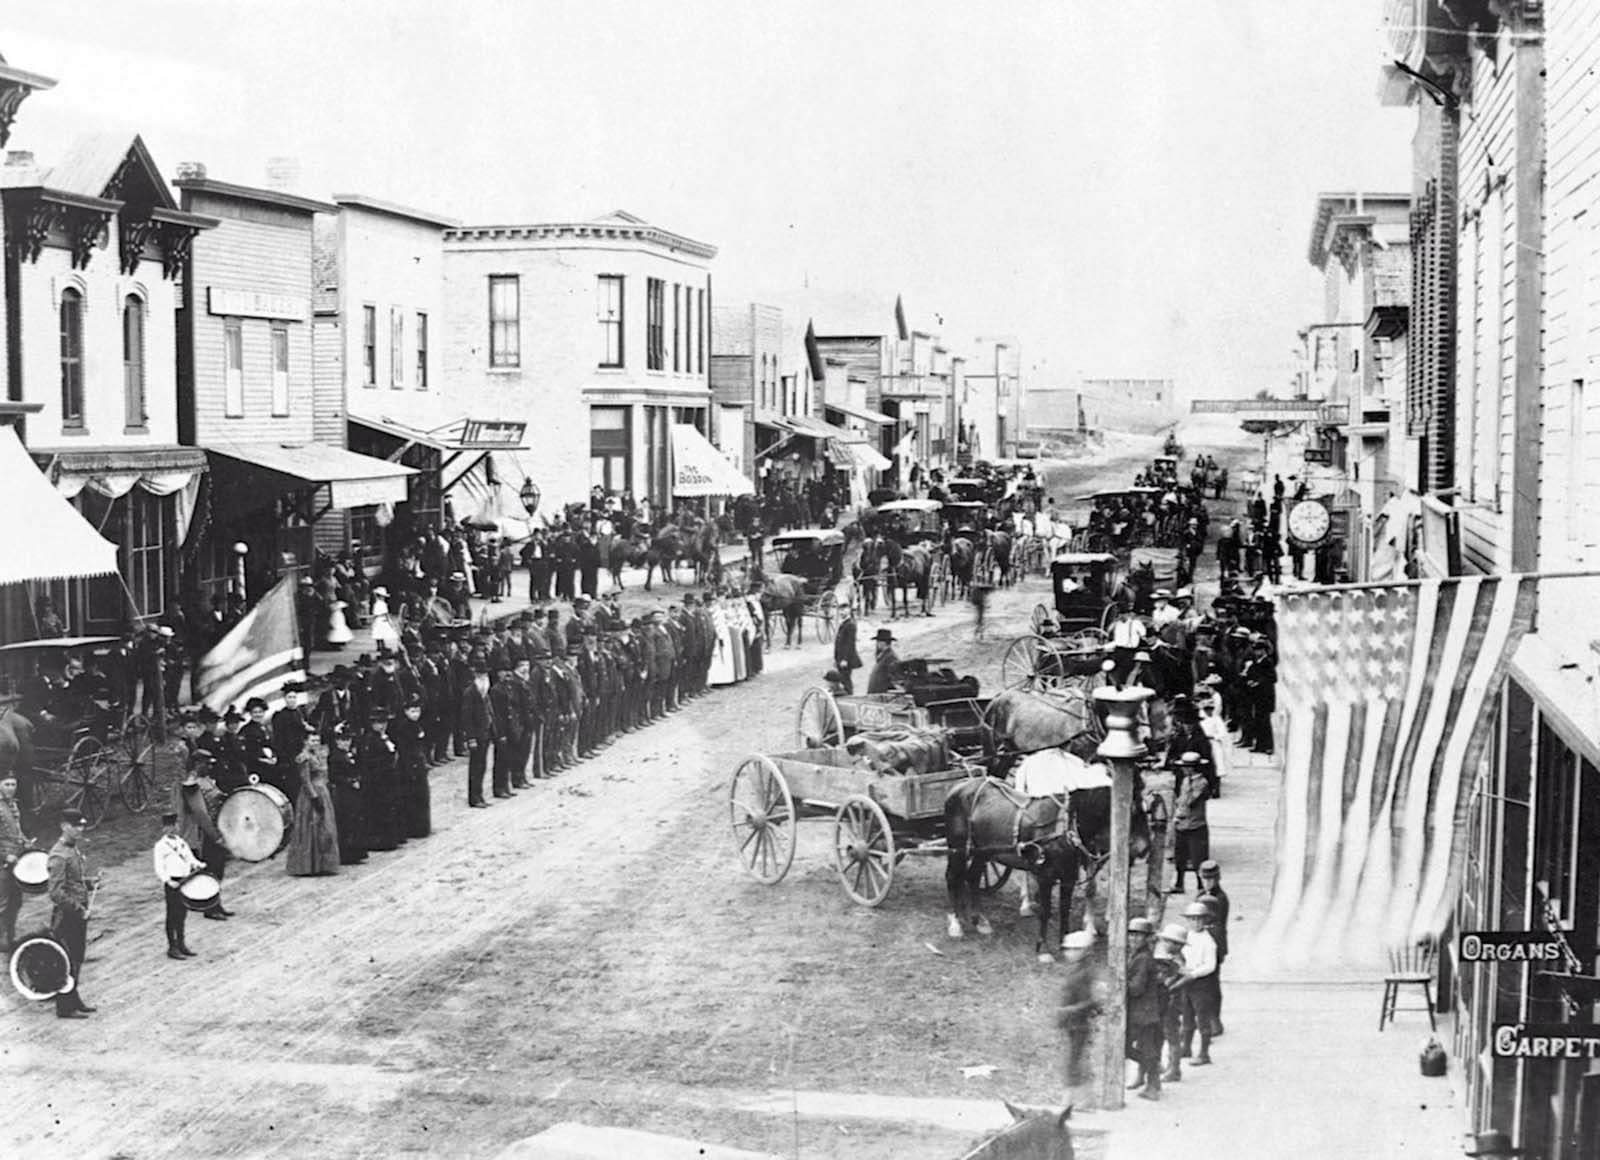 Civil War veterans on Fourth of July, or Decoration Day, on review on the main street of Ortonville, Minnesota. 1880.